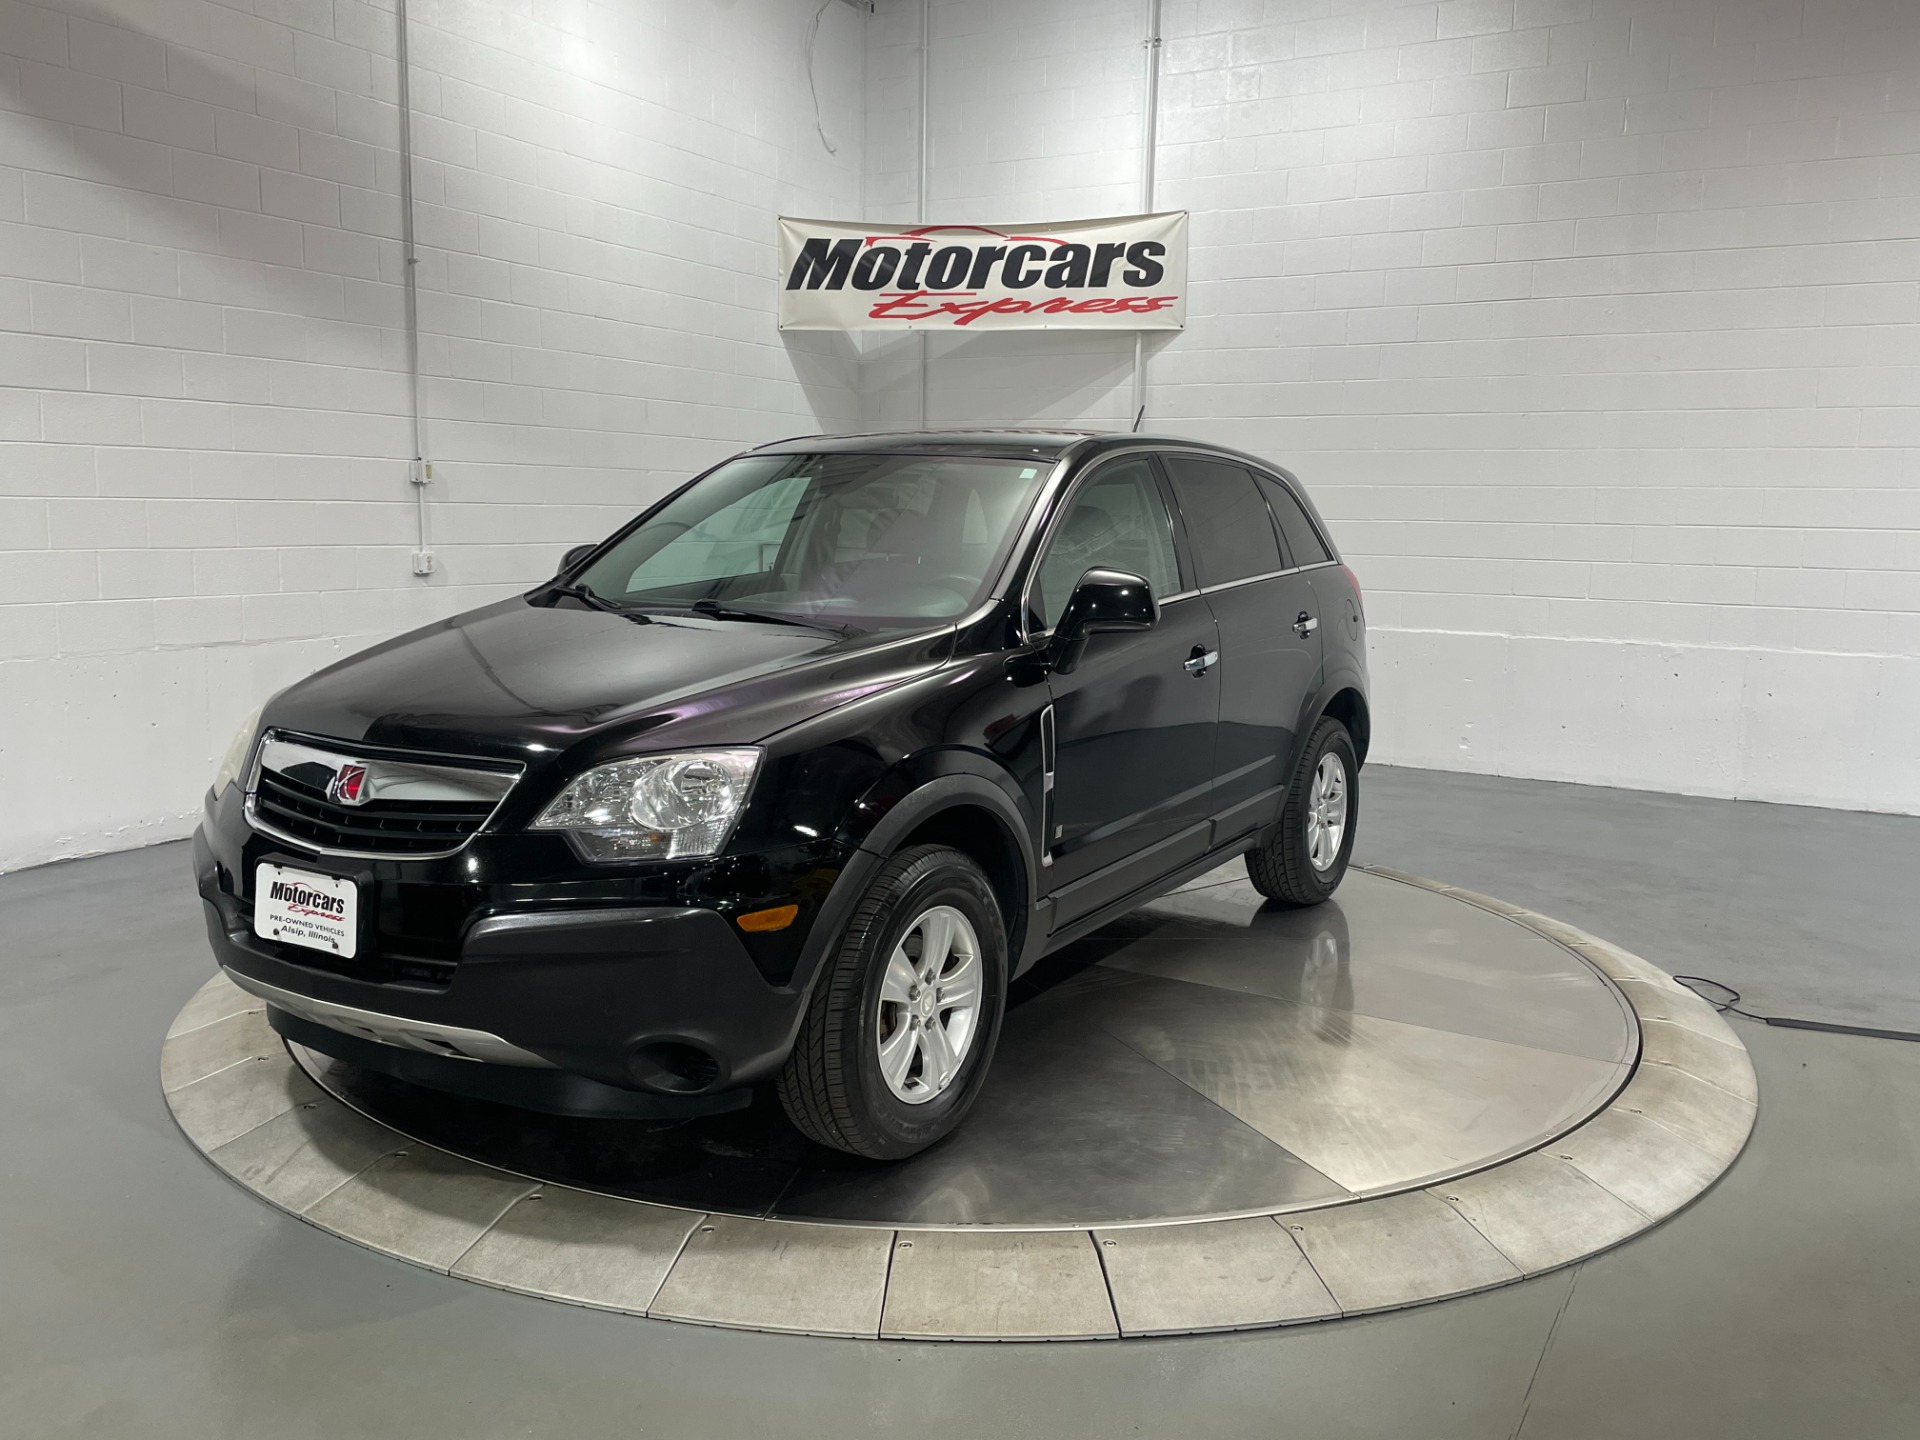 Used-2008-Saturn-Vue-XE-FWD